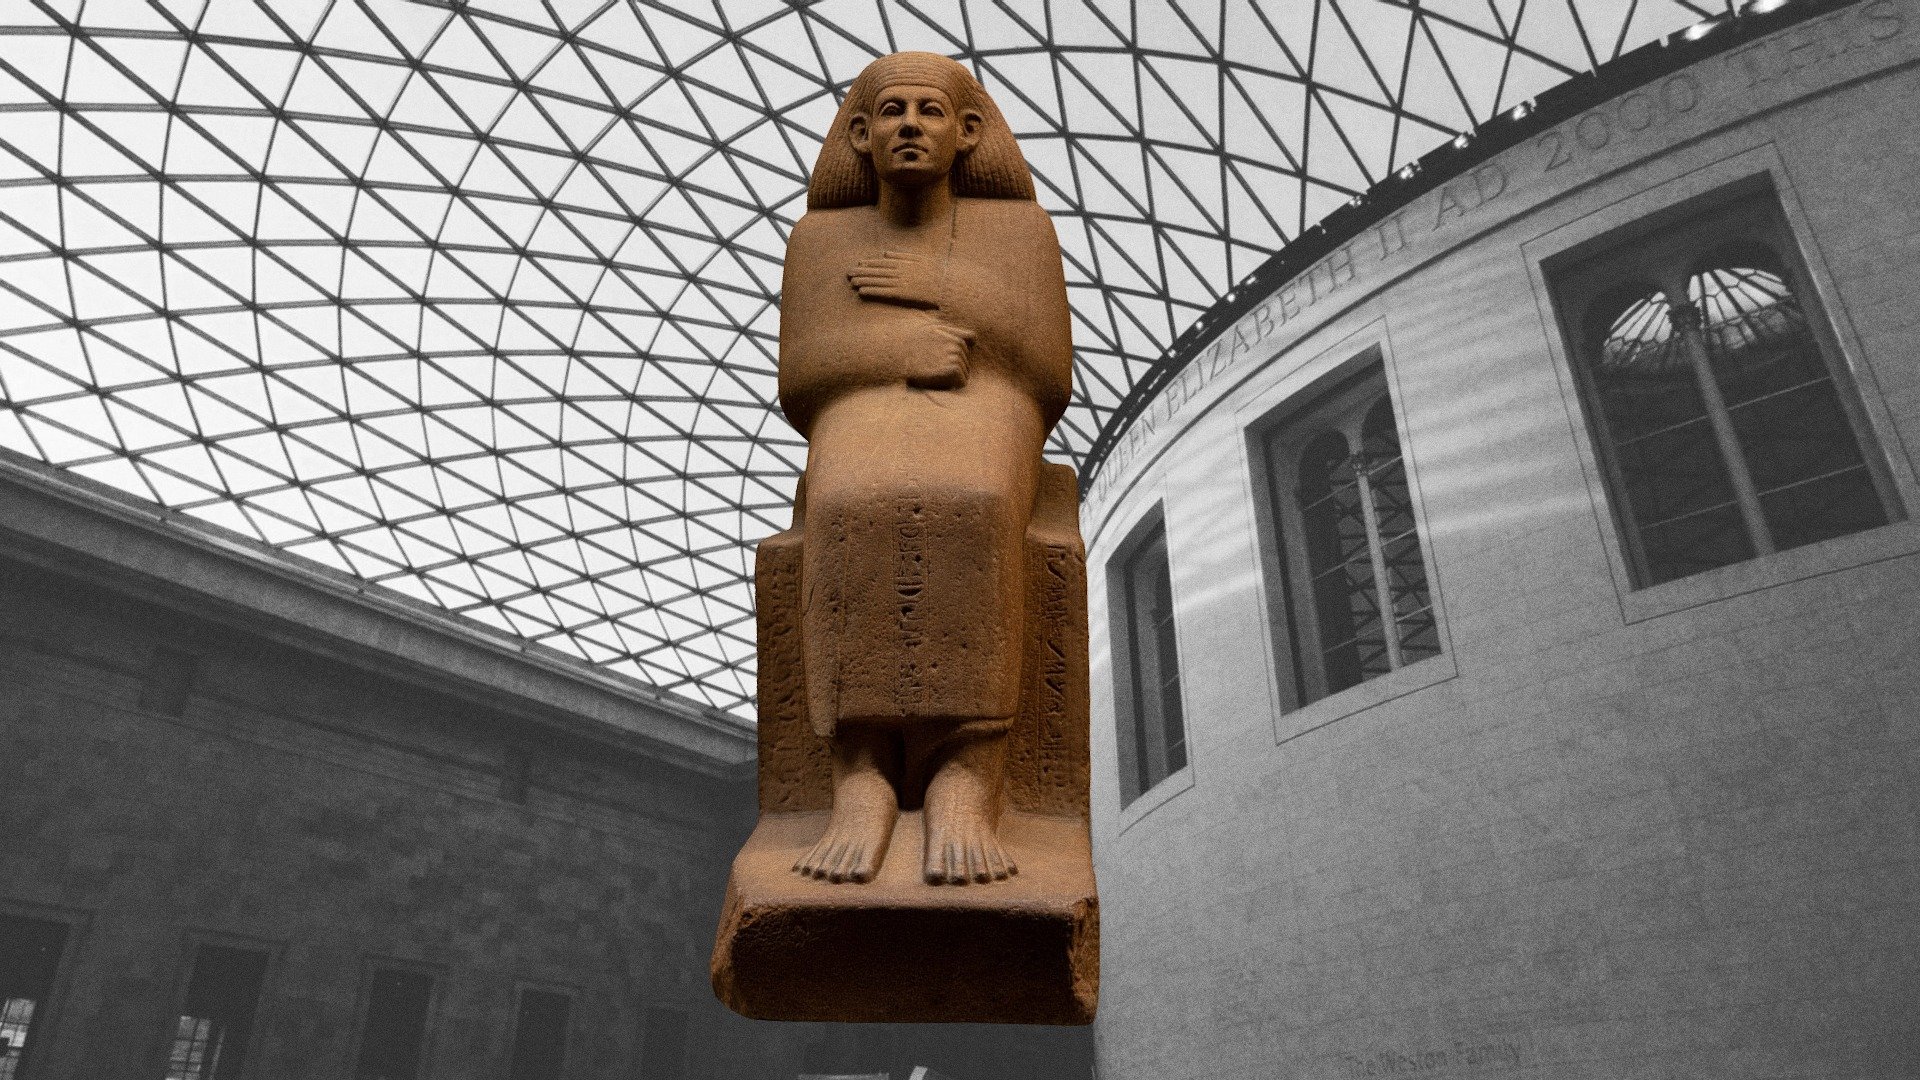 Statue of the Rehuankh Seated - BRITISH MUSEUM